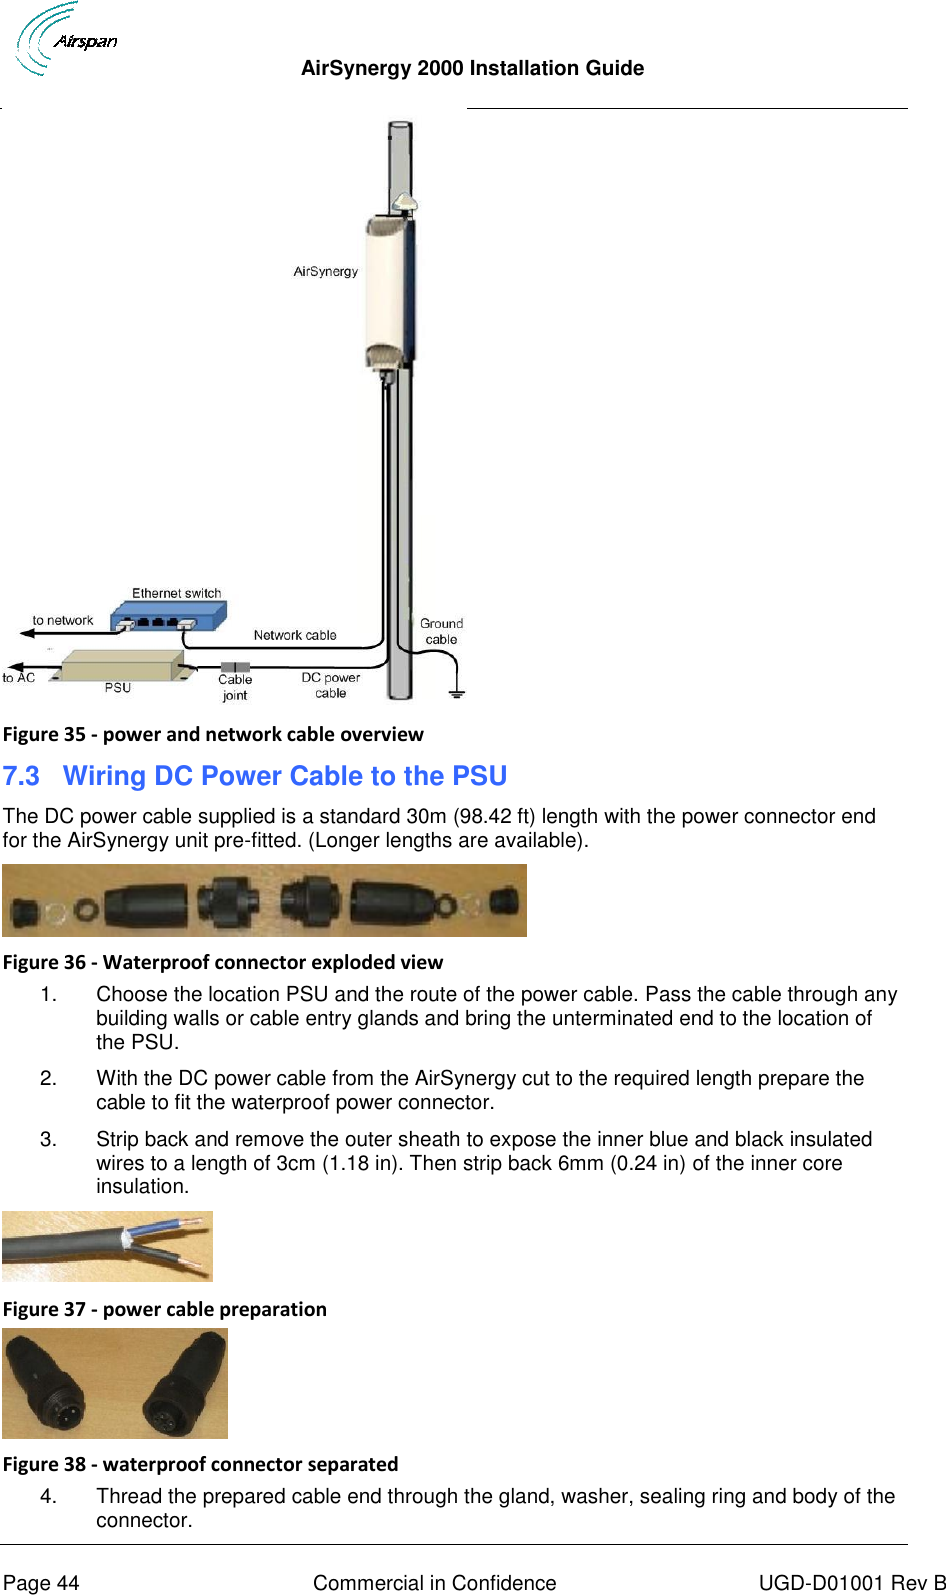  AirSynergy 2000 Installation Guide     Page 44  Commercial in Confidence  UGD-D01001 Rev B  Figure 35 - power and network cable overview 7.3 Wiring DC Power Cable to the PSU The DC power cable supplied is a standard 30m (98.42 ft) length with the power connector end for the AirSynergy unit pre-fitted. (Longer lengths are available).   Figure 36 - Waterproof connector exploded view 1.  Choose the location PSU and the route of the power cable. Pass the cable through any building walls or cable entry glands and bring the unterminated end to the location of the PSU. 2.  With the DC power cable from the AirSynergy cut to the required length prepare the cable to fit the waterproof power connector.  3.  Strip back and remove the outer sheath to expose the inner blue and black insulated wires to a length of 3cm (1.18 in). Then strip back 6mm (0.24 in) of the inner core insulation.  Figure 37 - power cable preparation  Figure 38 - waterproof connector separated 4.  Thread the prepared cable end through the gland, washer, sealing ring and body of the connector. 